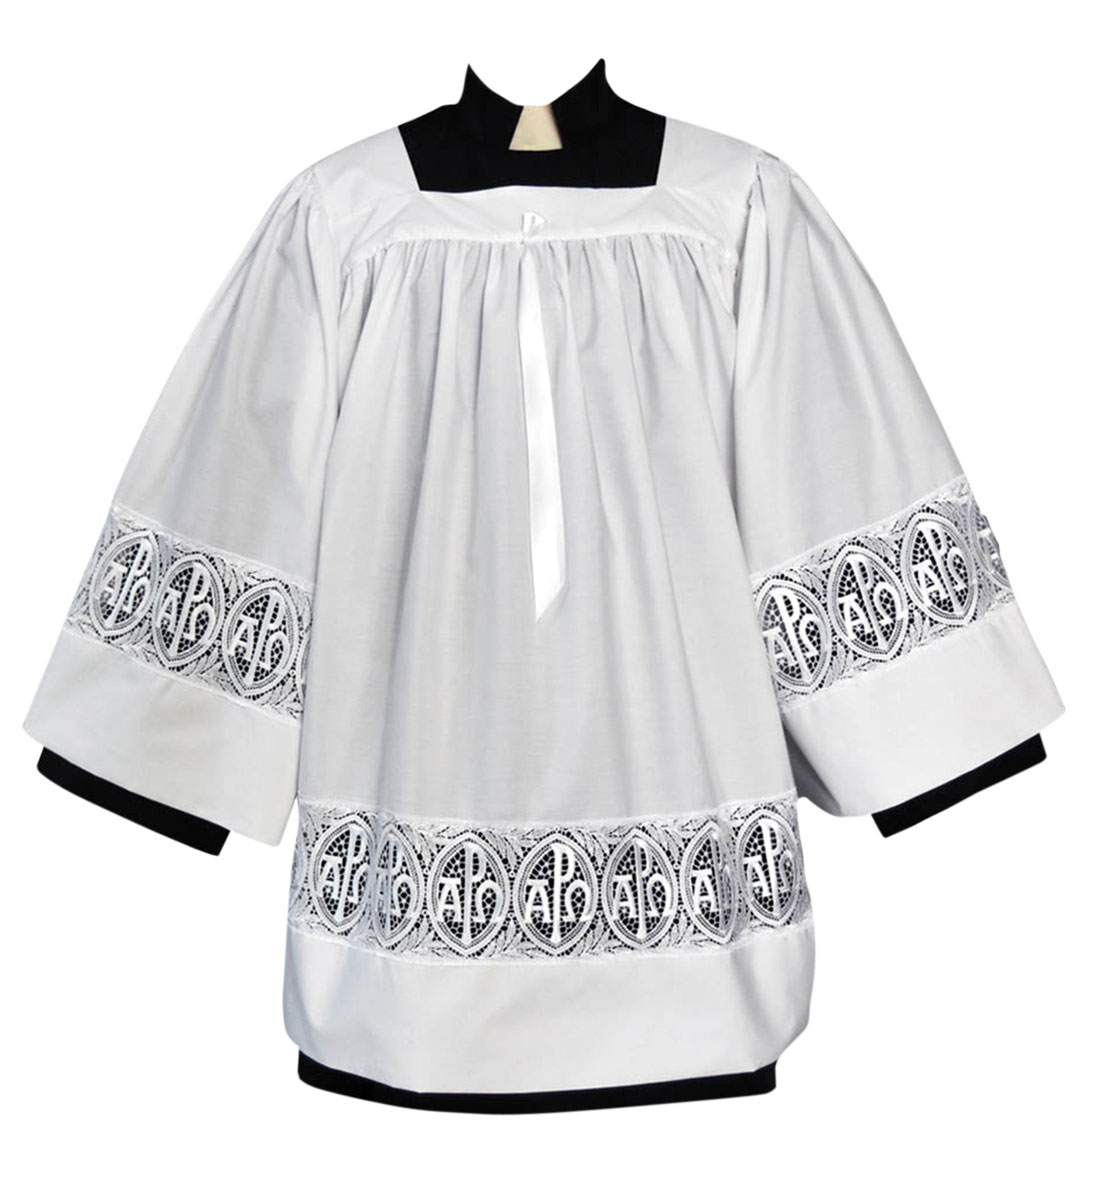 Clergy Surplice with Gold Alpha Omega Symbols - Clergy Apparel